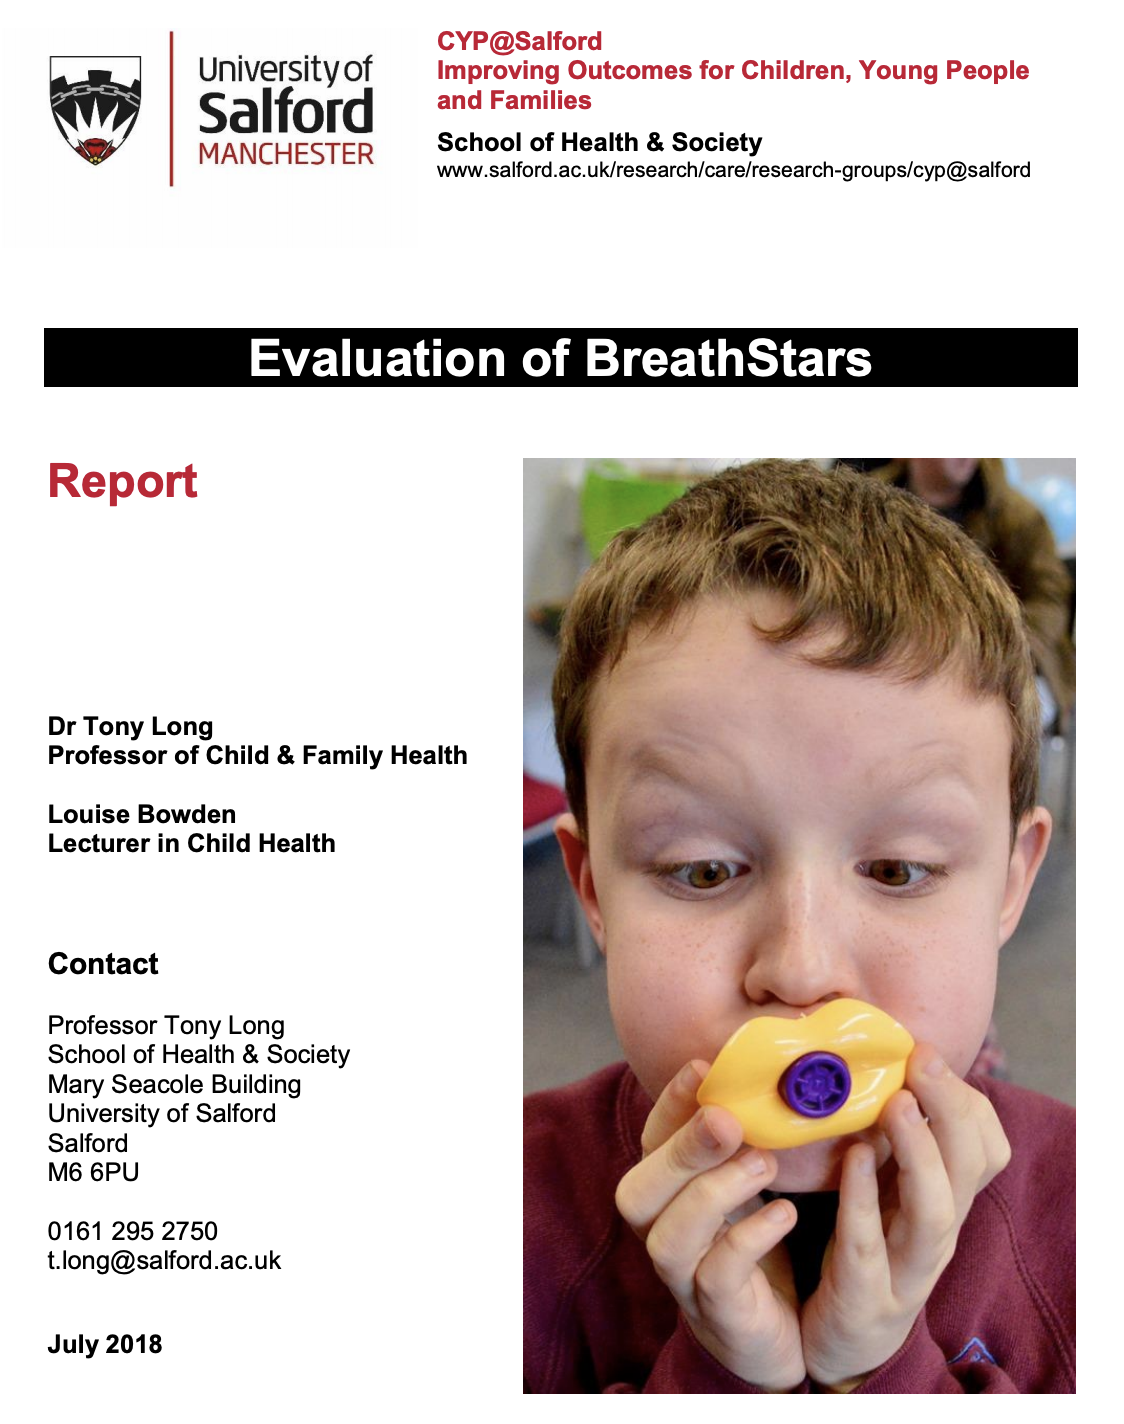 BreathStars - can singing help children with asthma? featured image